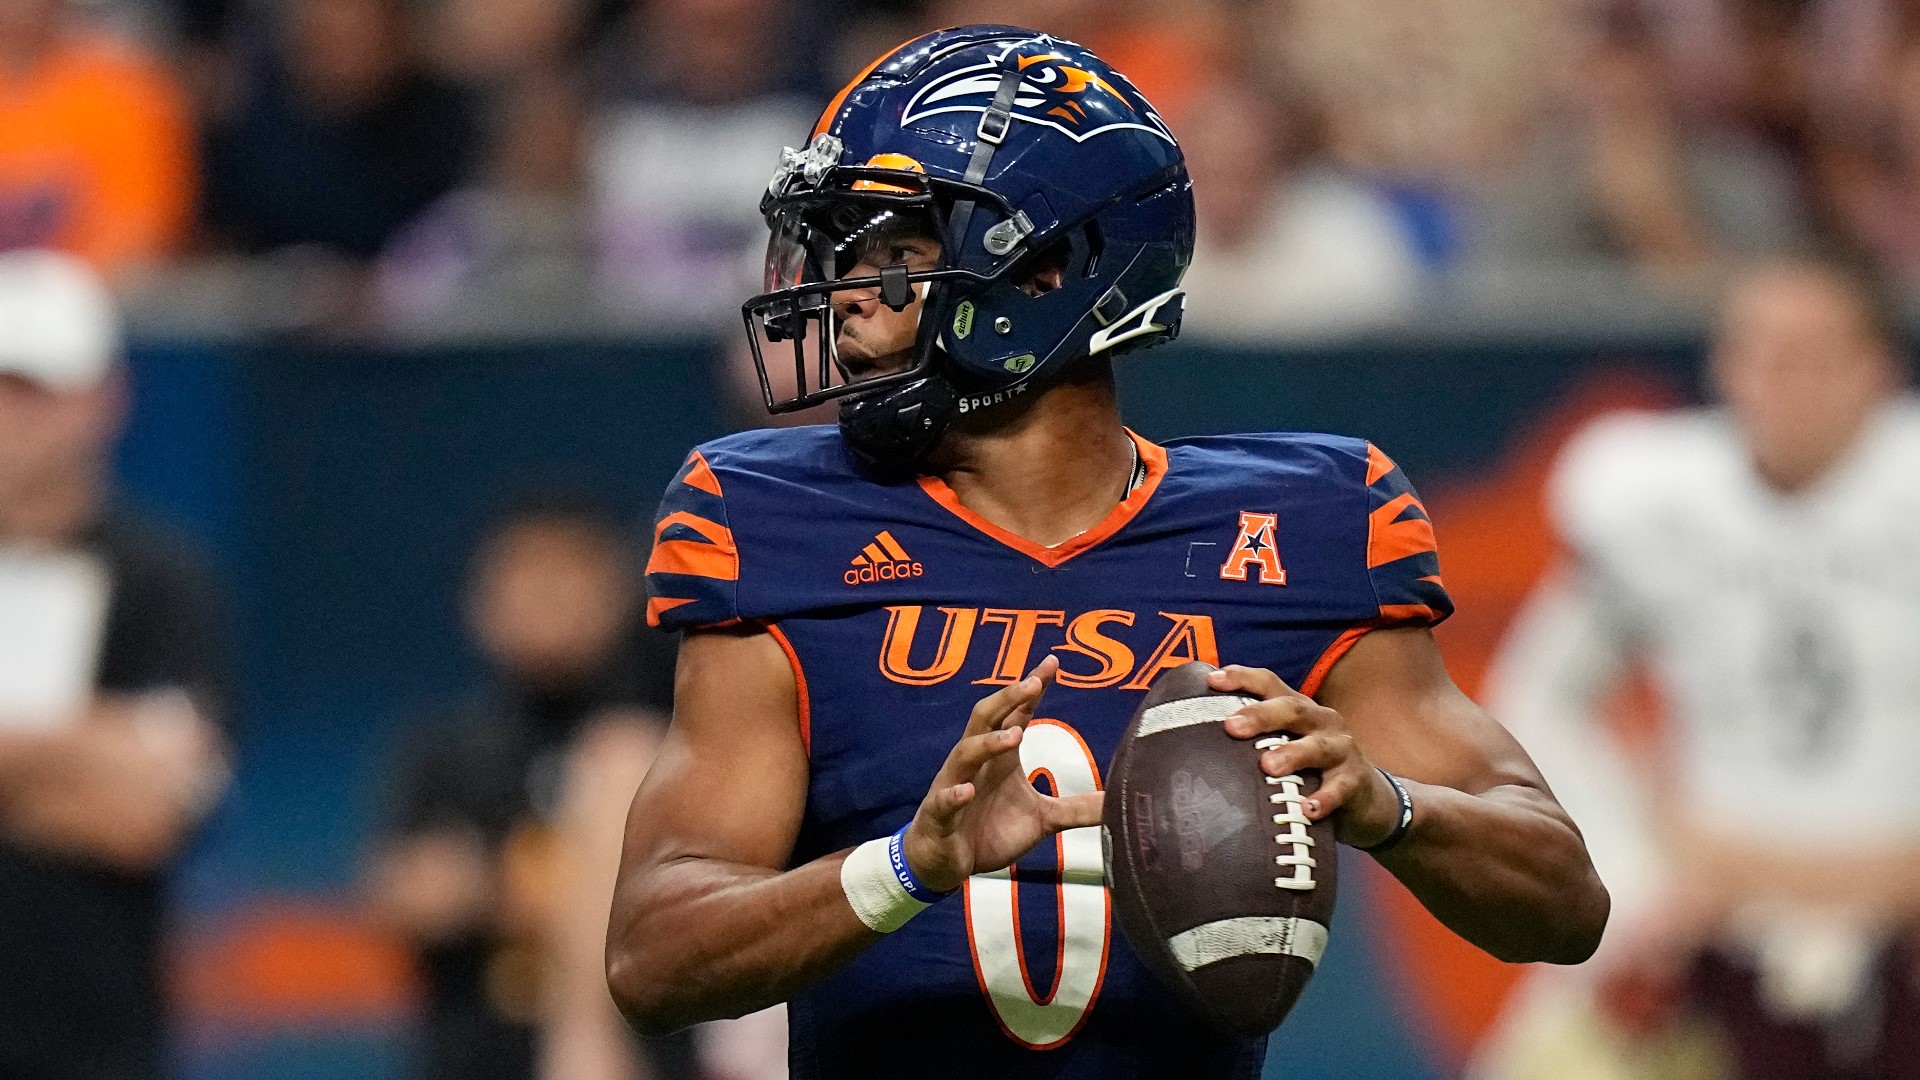 Harris suited up as starting quarterback over the last four seasons for the Roadrunners.